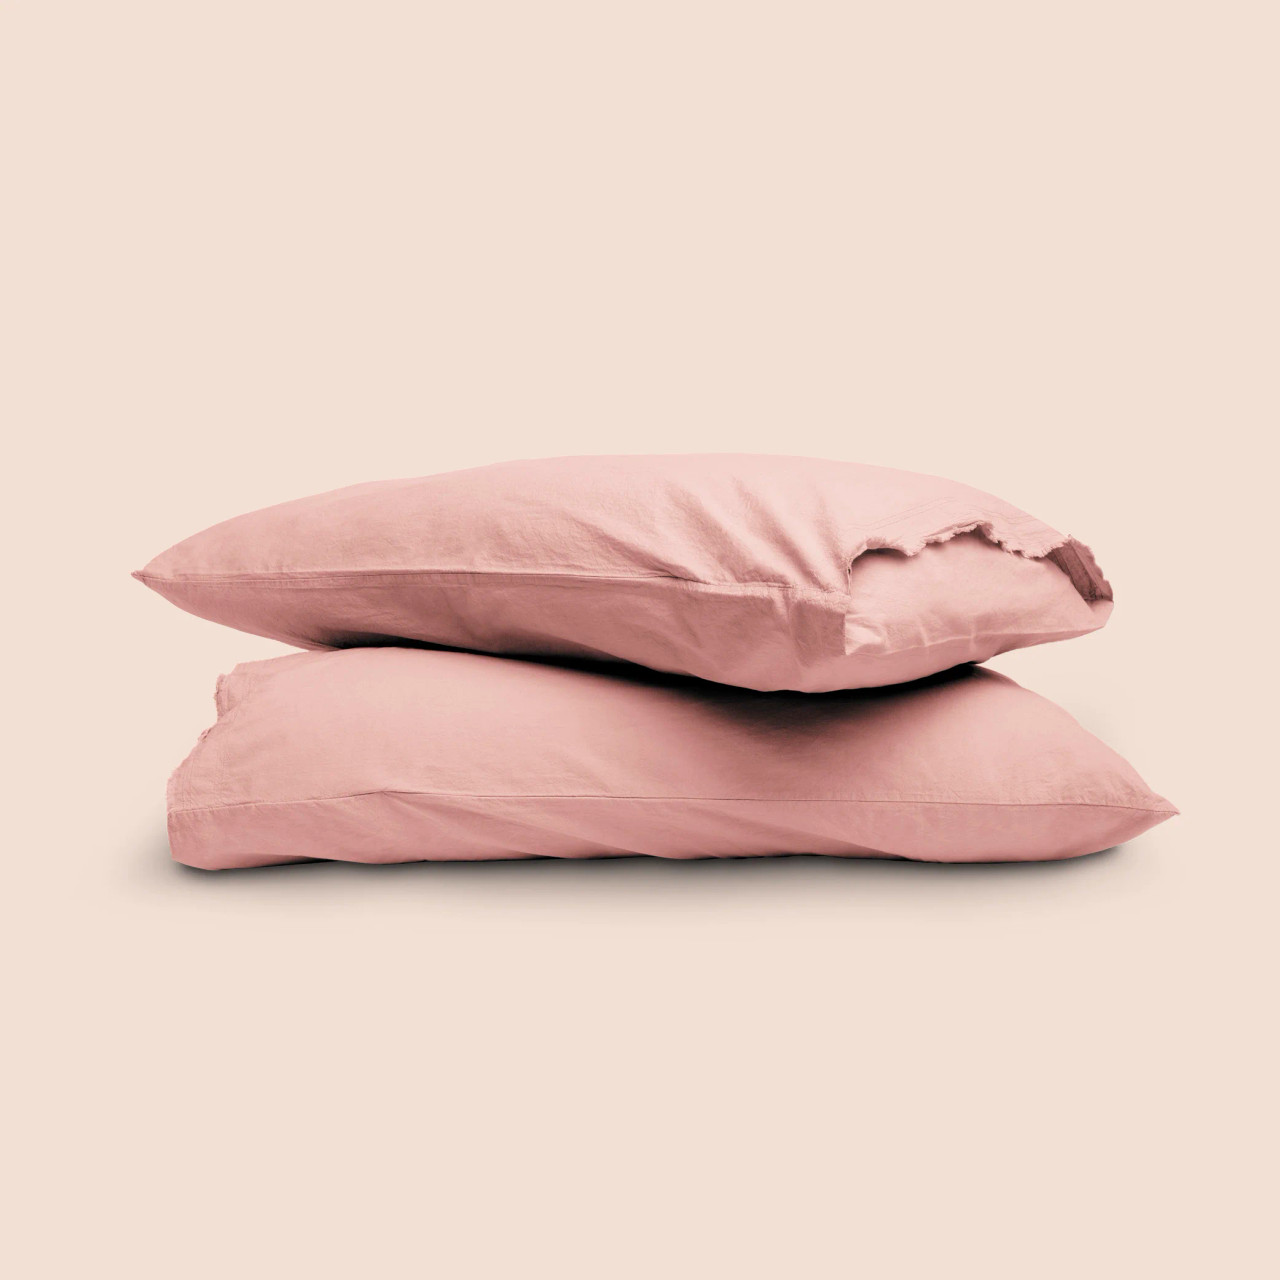 Dr. Weil Garment Washed Percale Bed Sheet Set by PureCare - Pink Sandstone Color Pillowcases